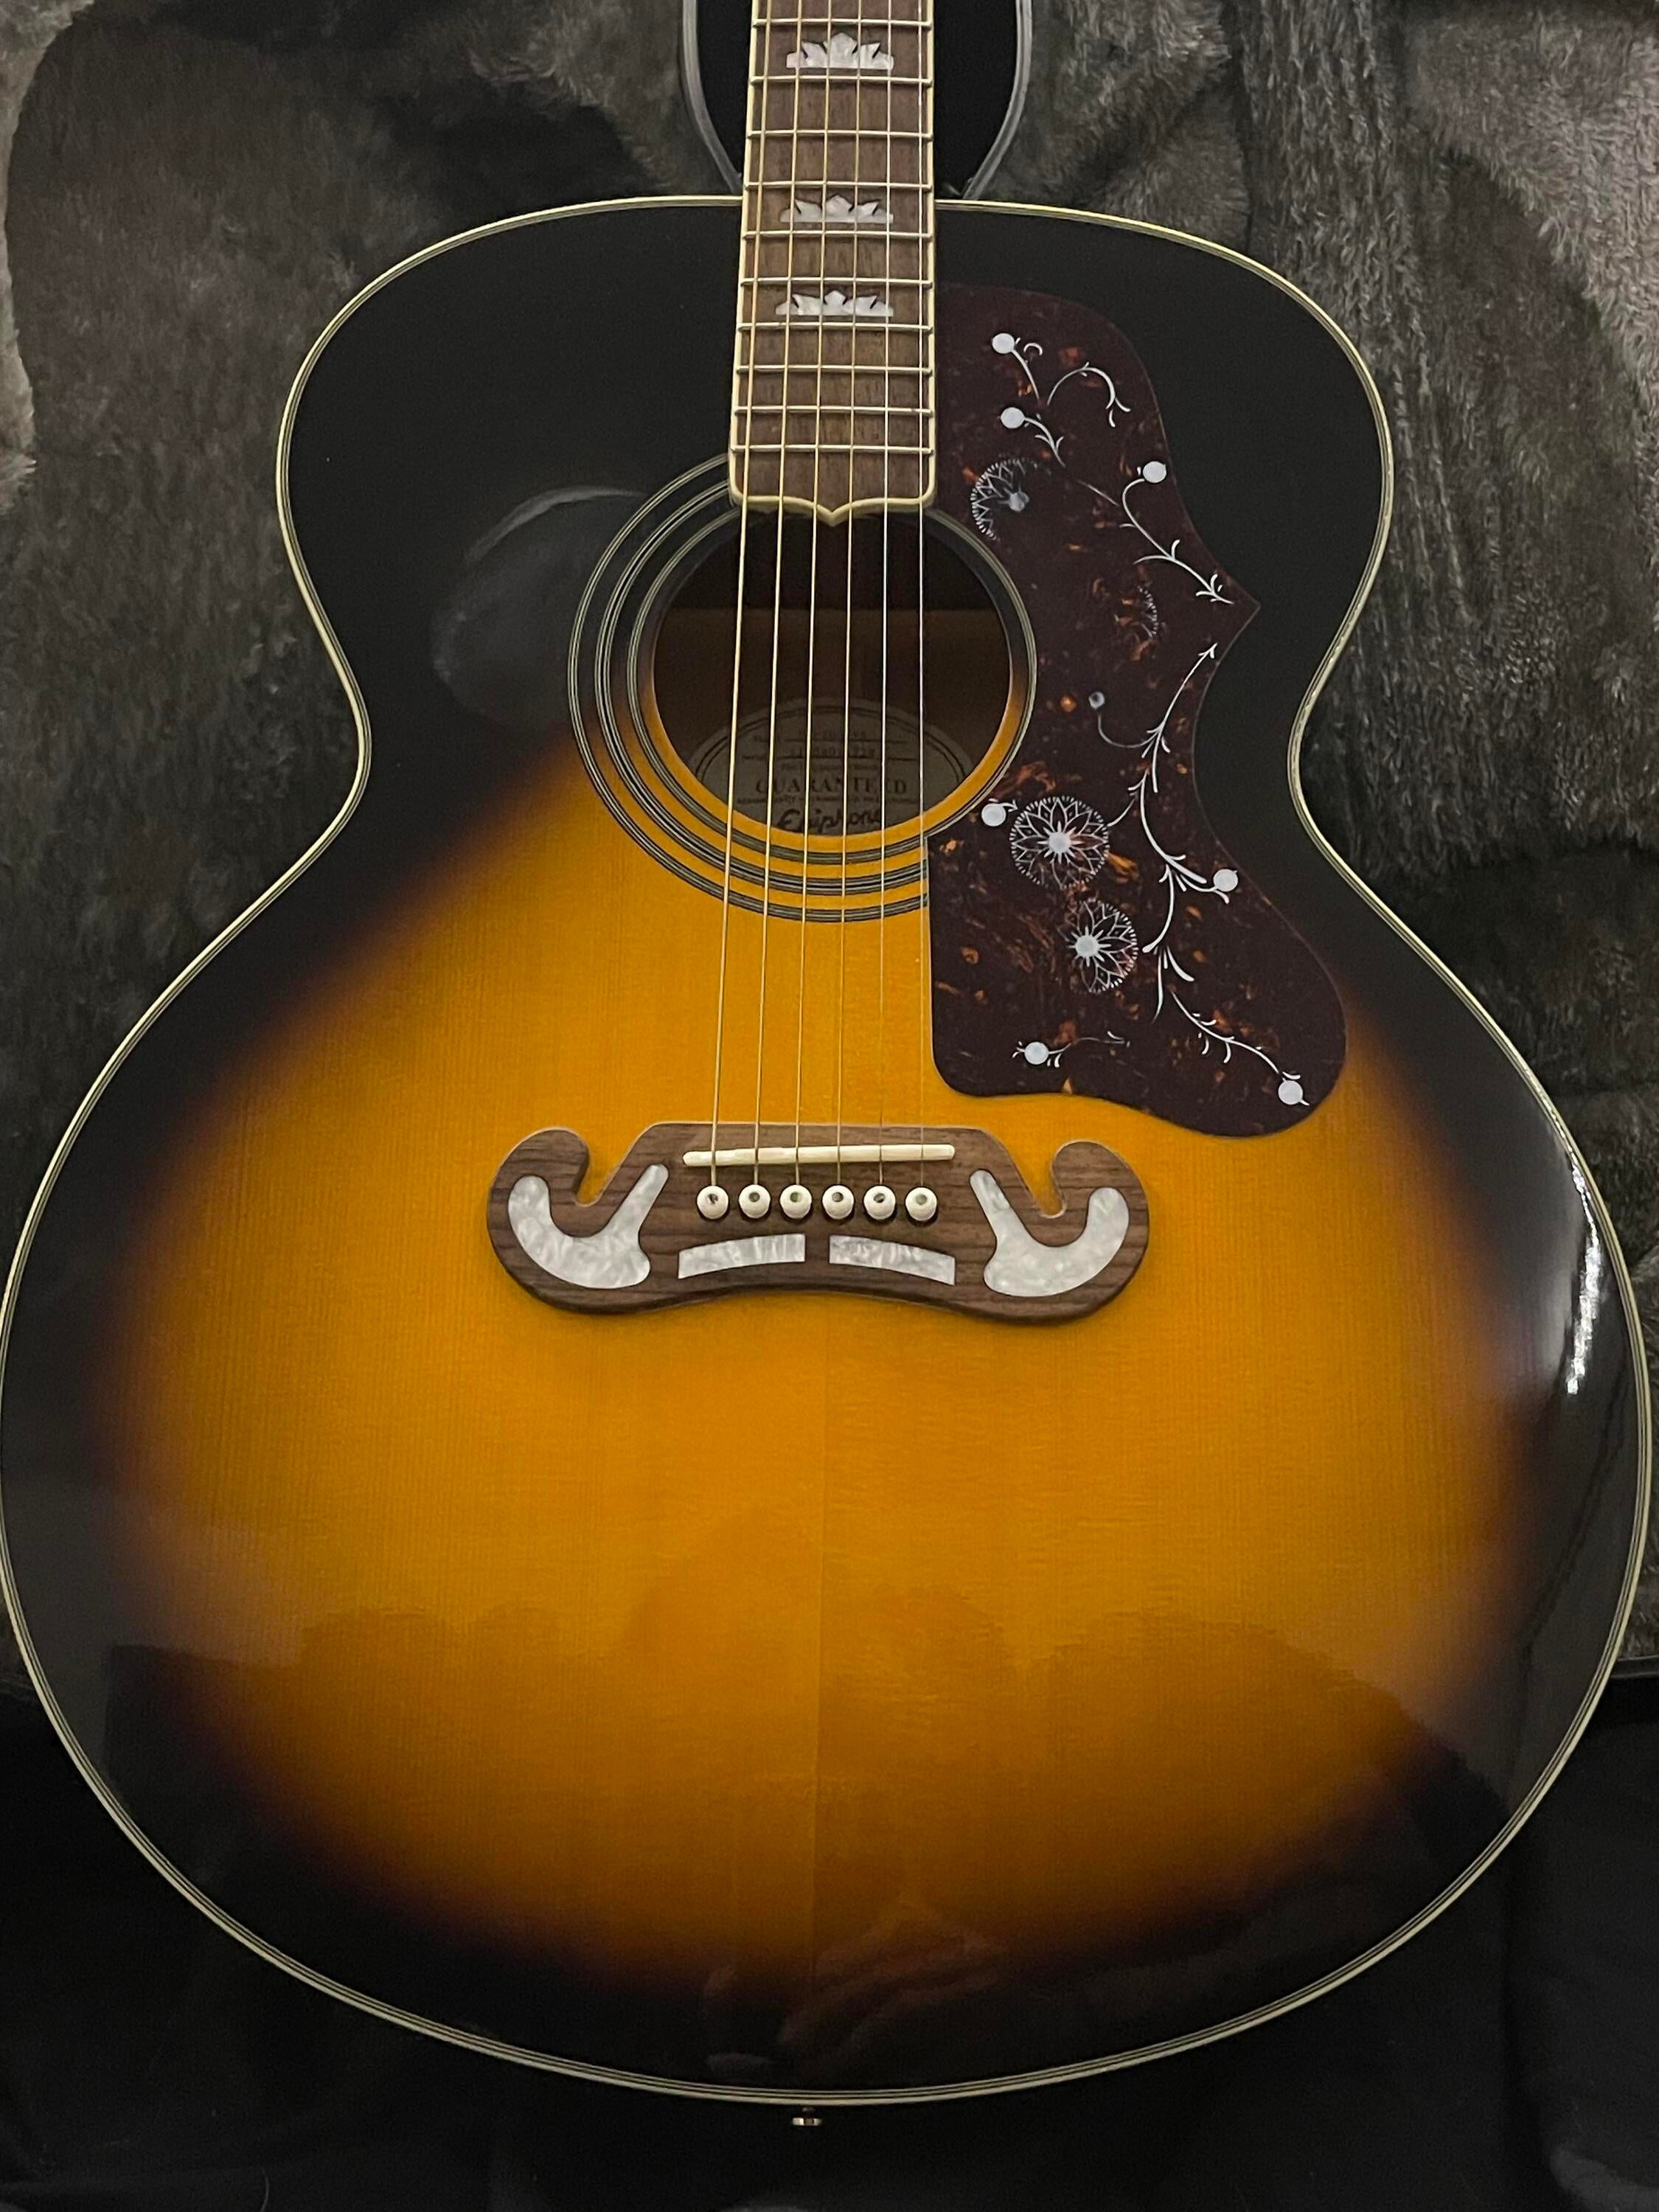 Used Epiphone J-200 Acoustic Guitar - Aged | Gear Exchange